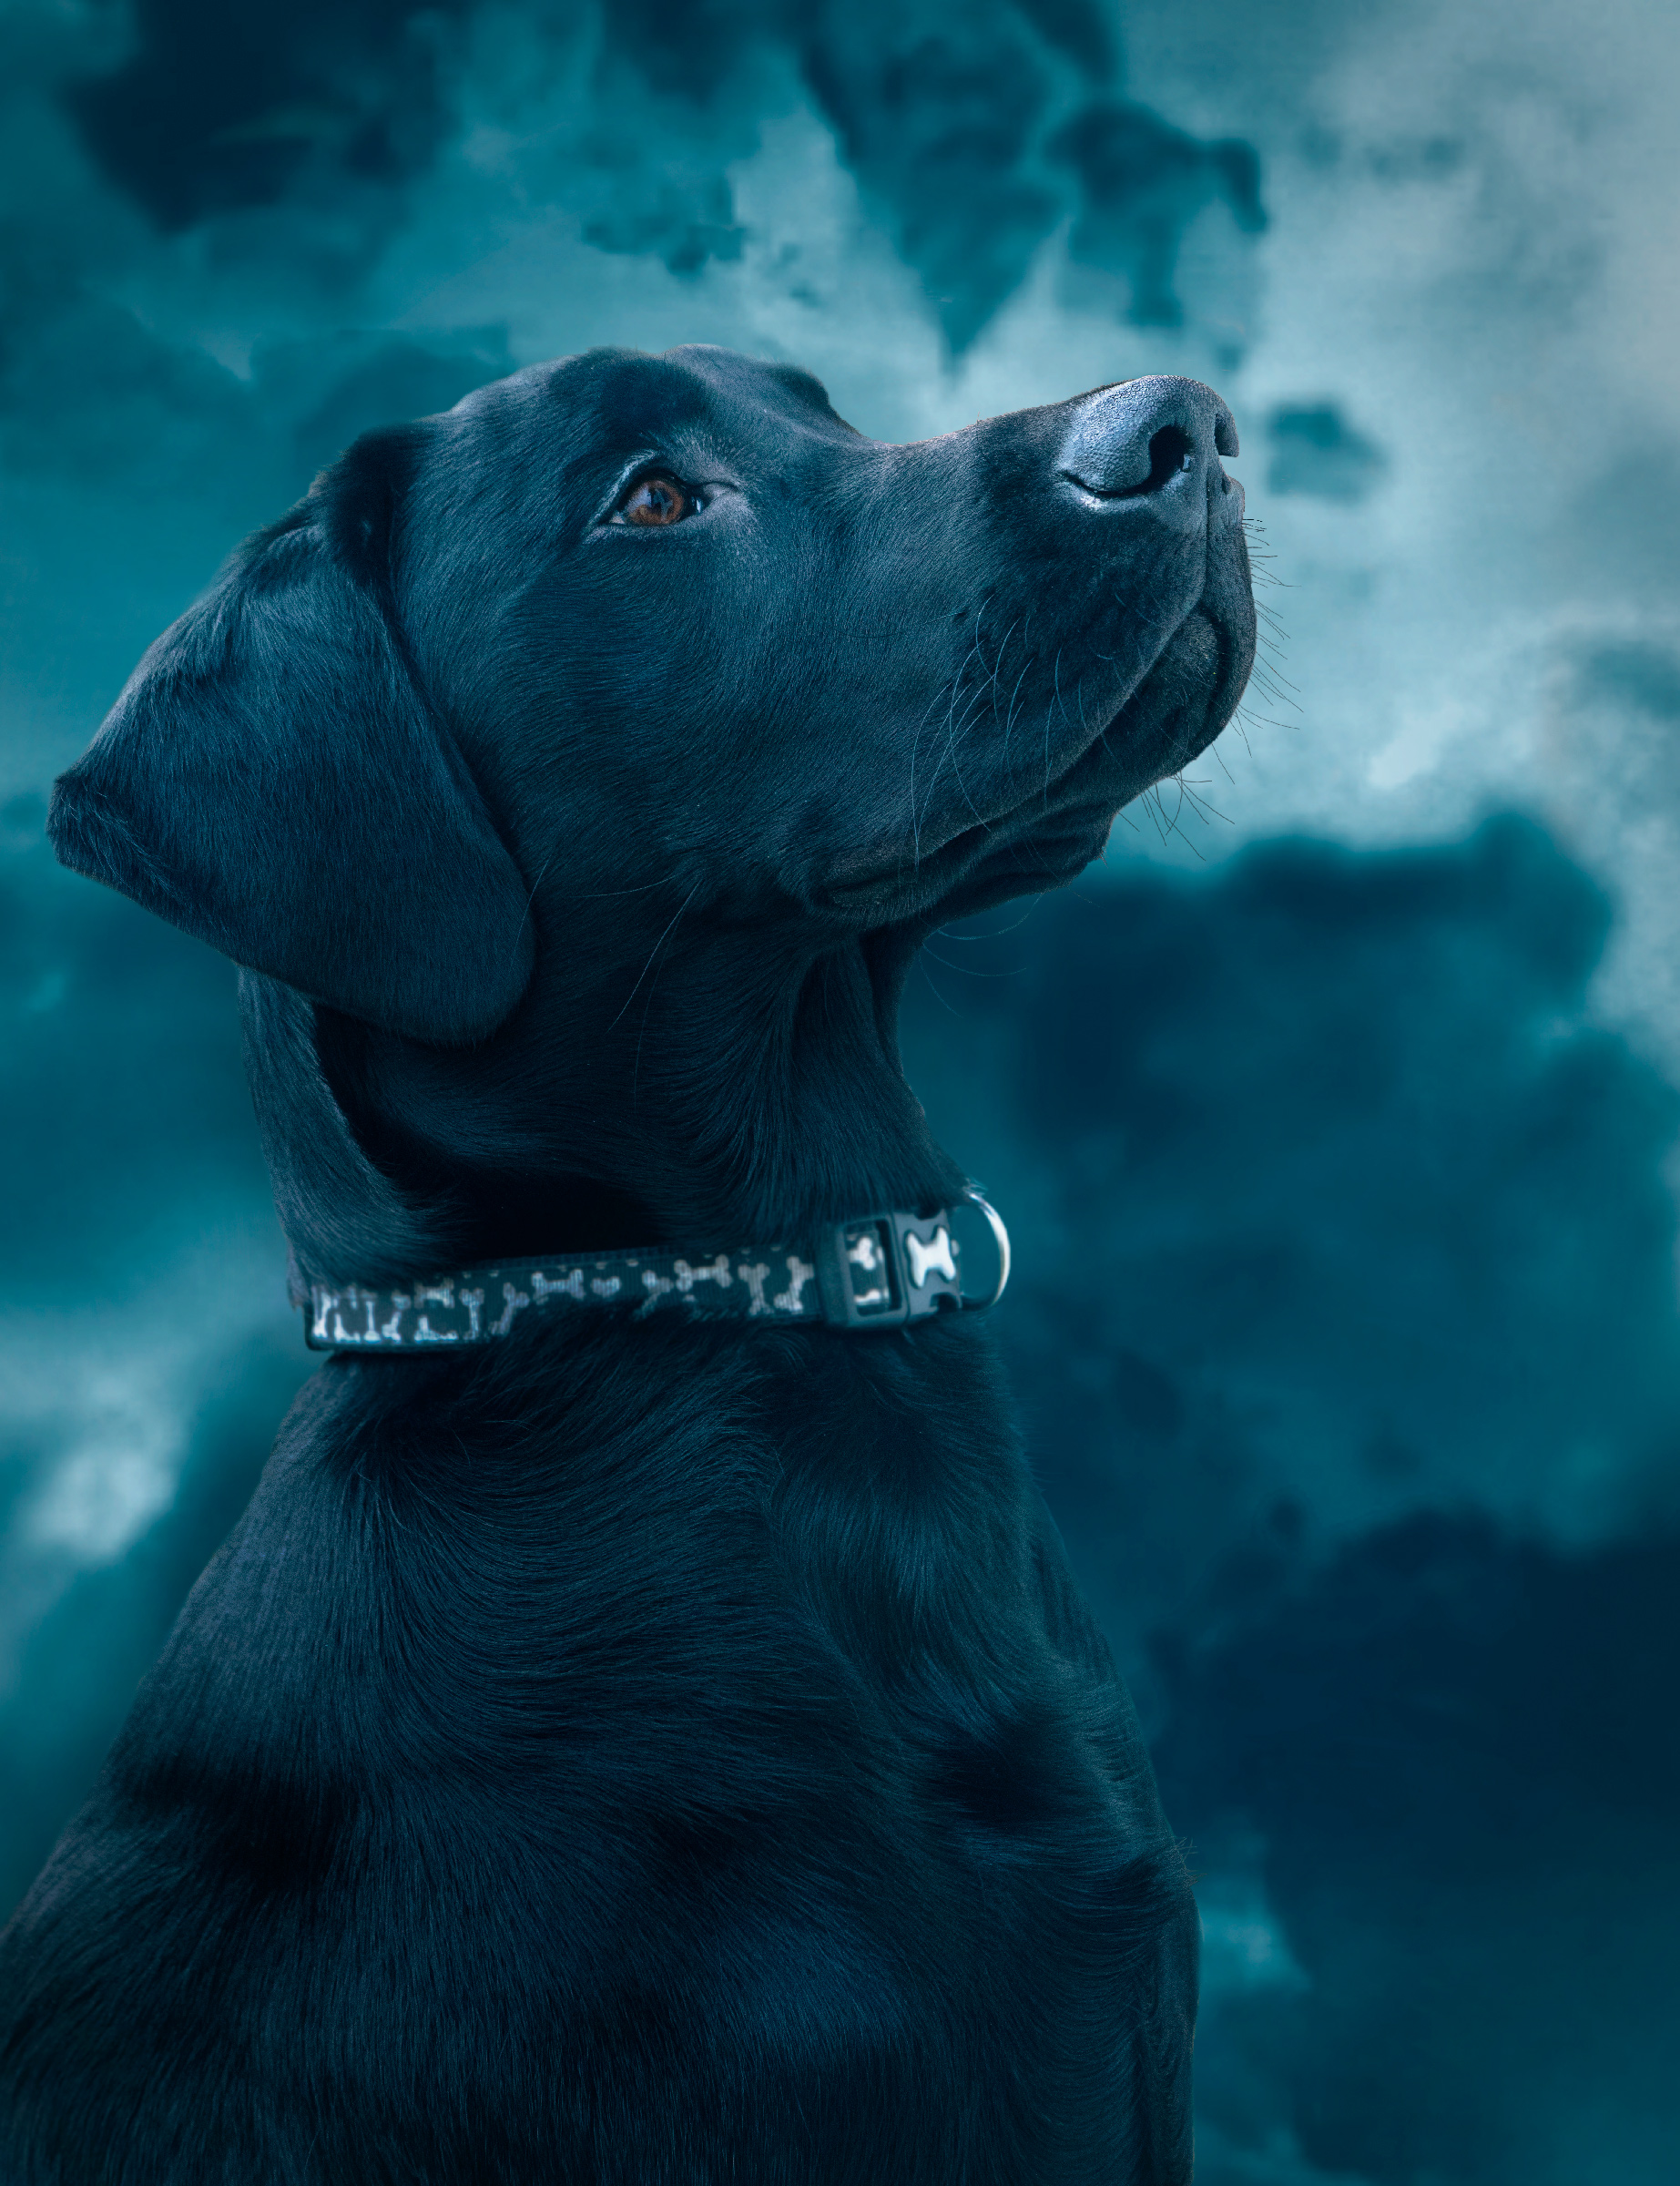 An image of a dog in dark blue tones by Tay Morgan